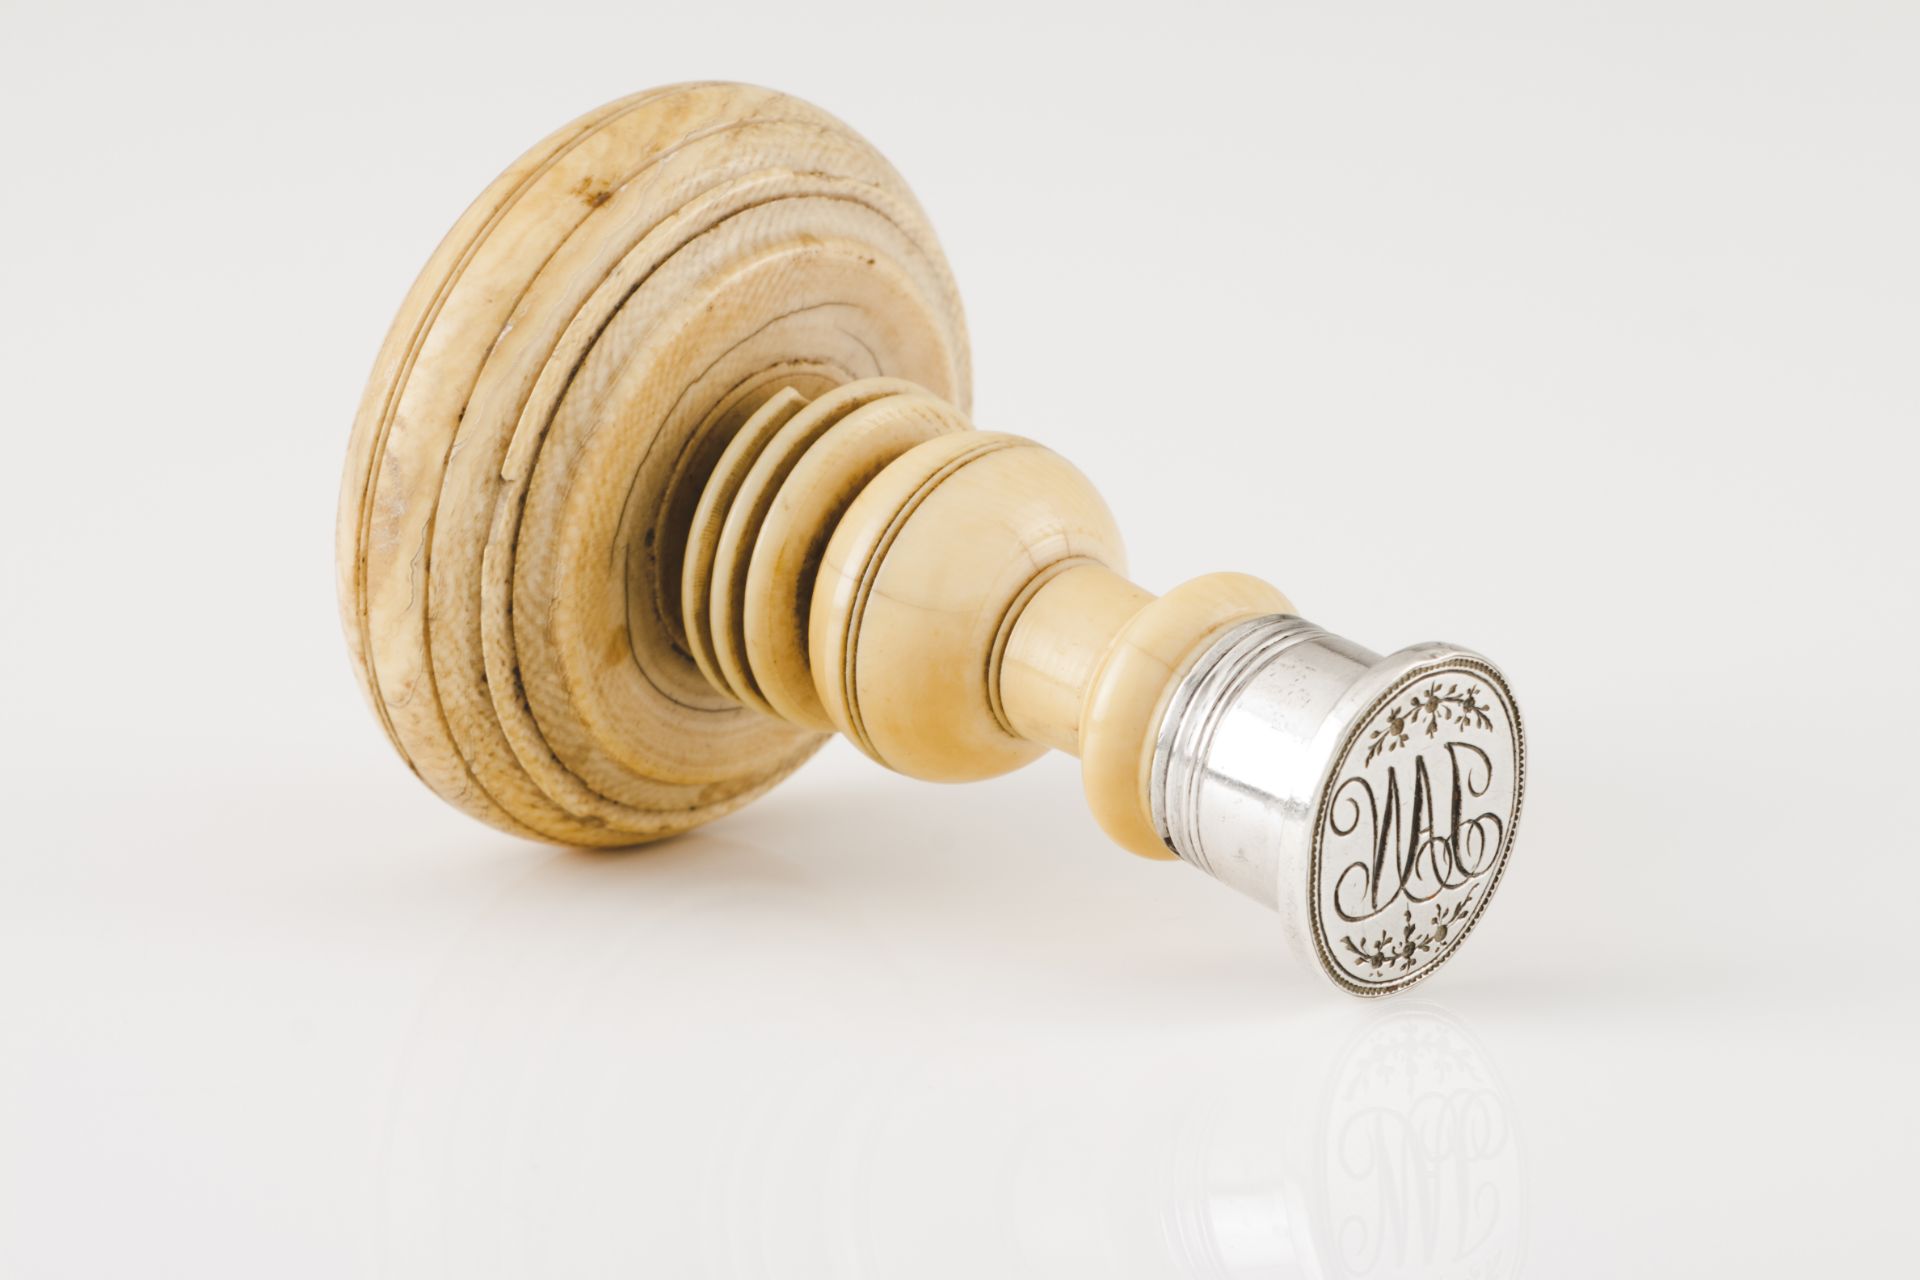 A wax sealSilver Turned ivory handle and seal with JAN monogram Unmarked in compliance with Decree-